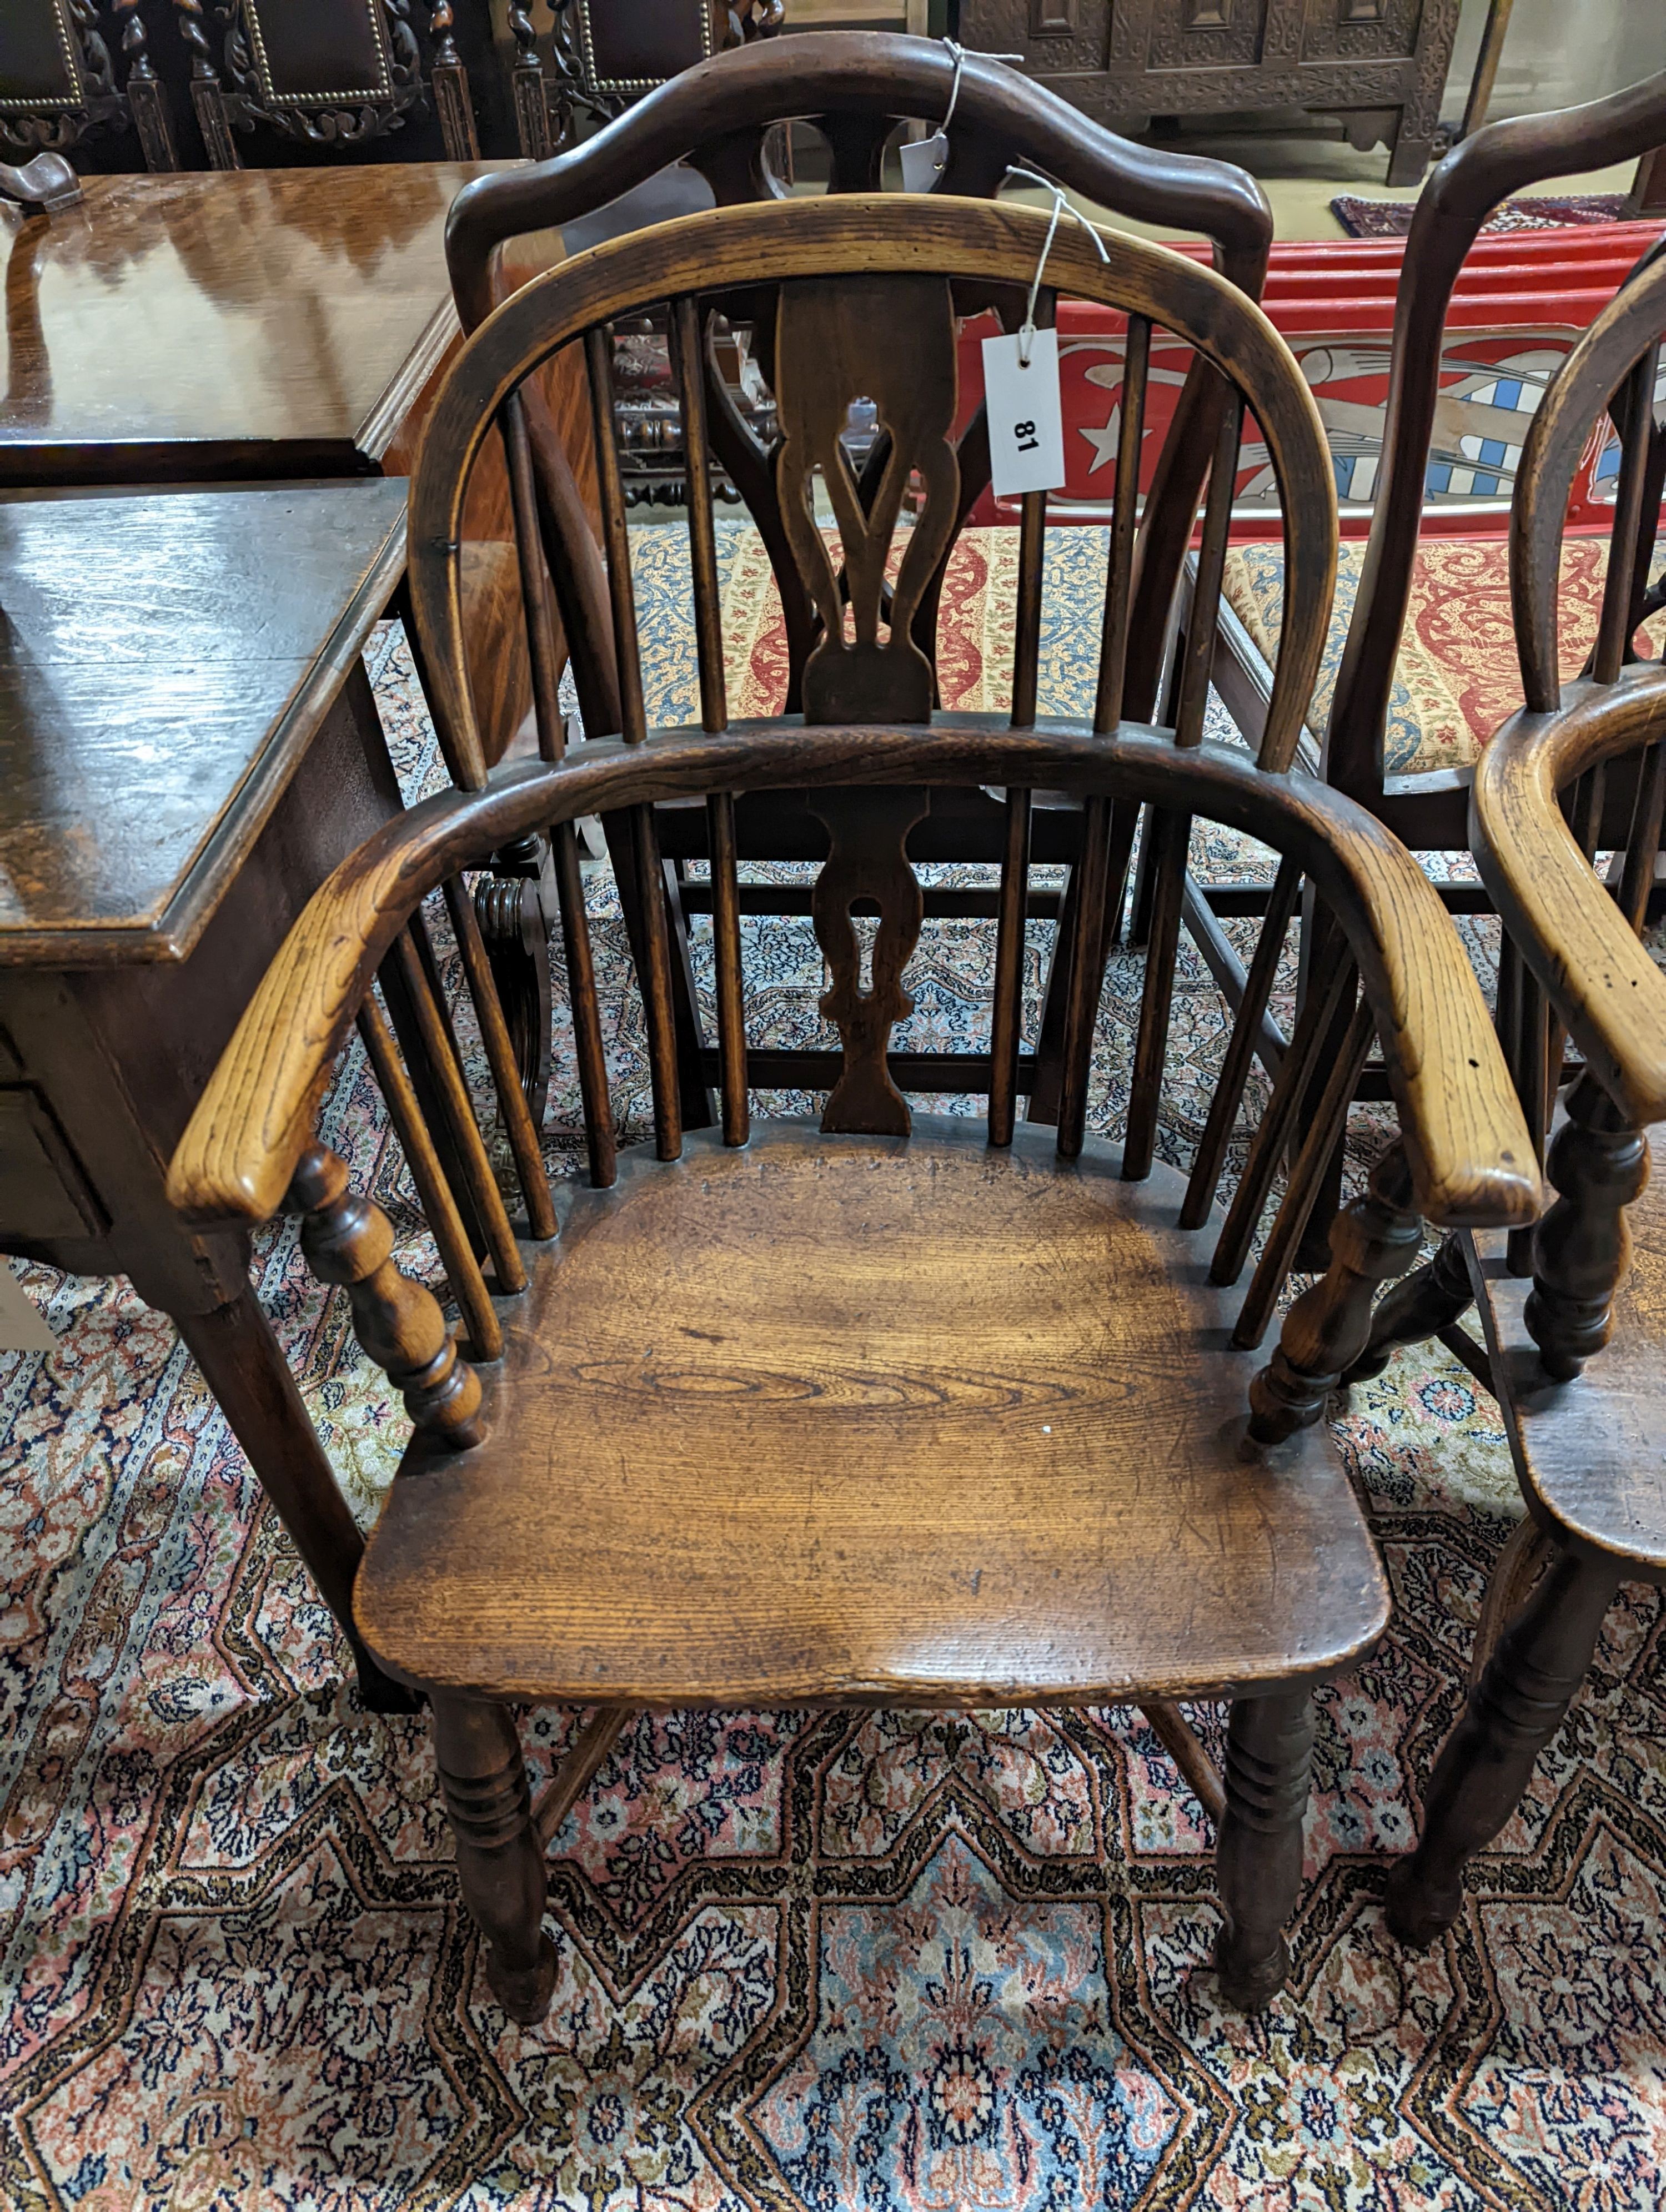 A pair of early 19th century ash and elm Windsor chairs. H-87cm.